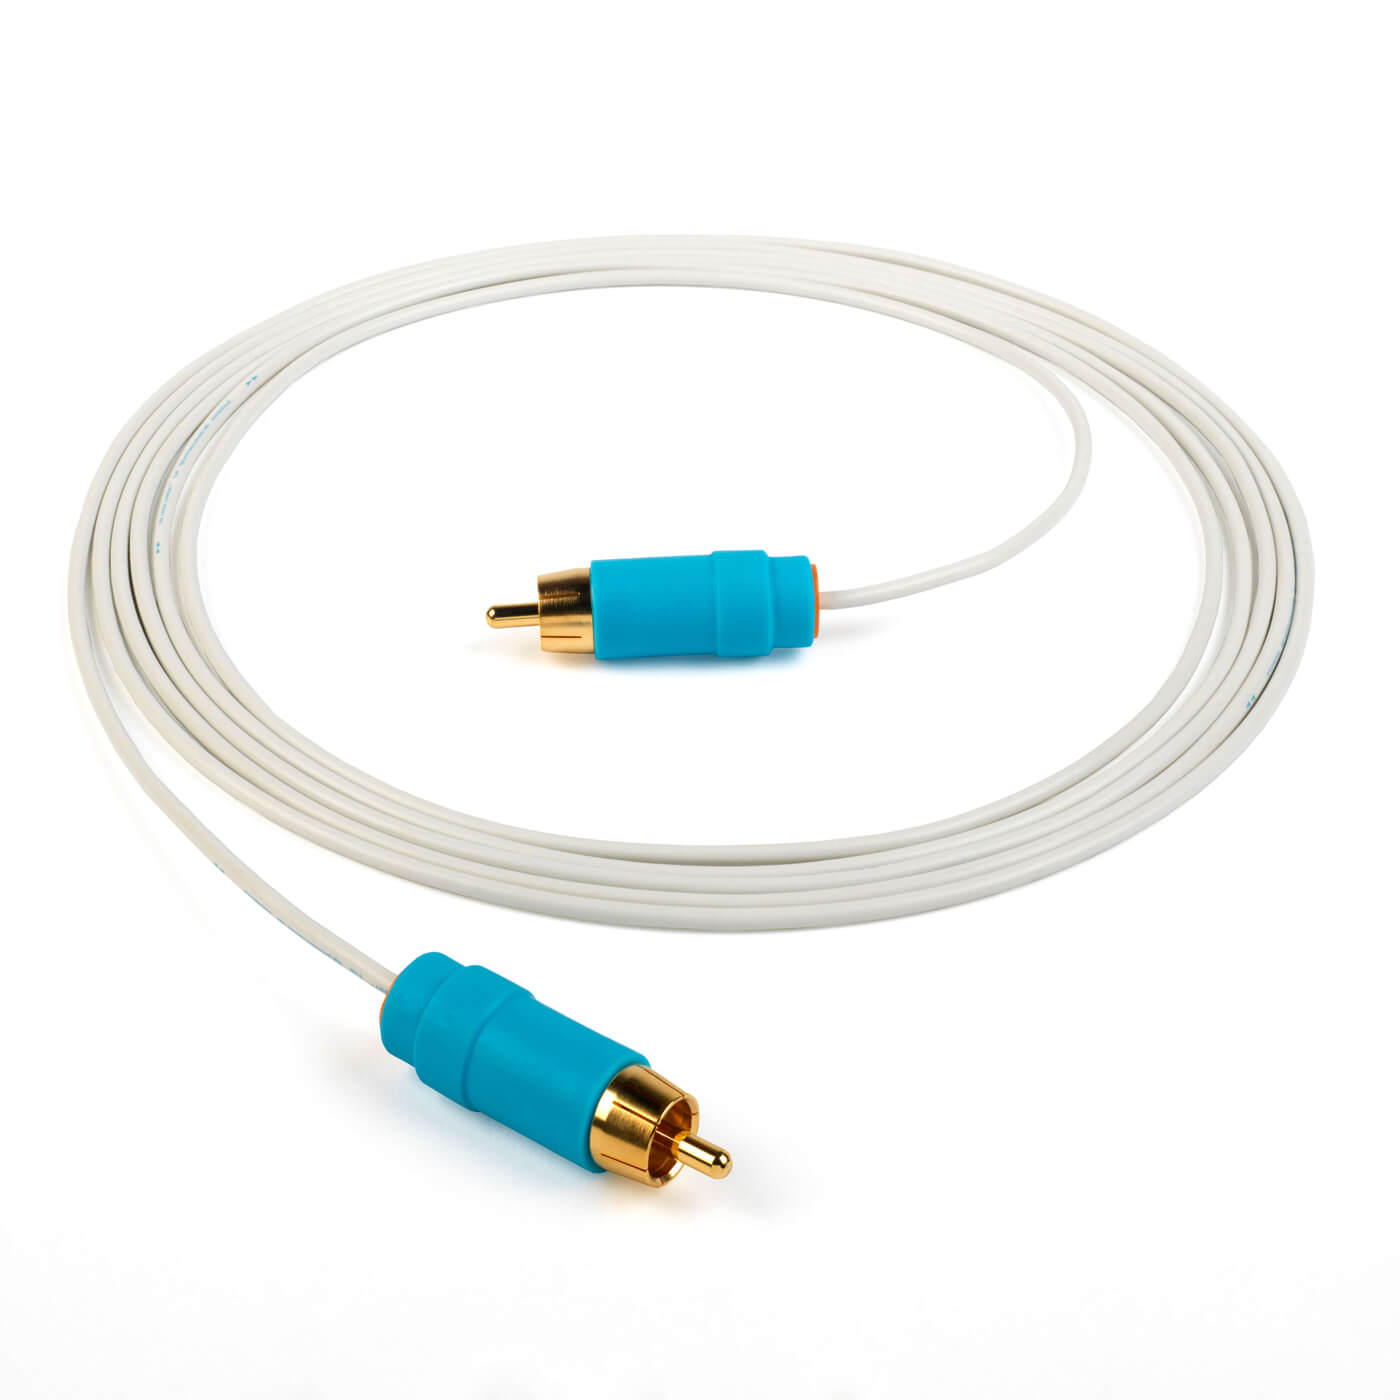 CHORD C-SUB SUBWOOFER INTERCONNECT CABLE